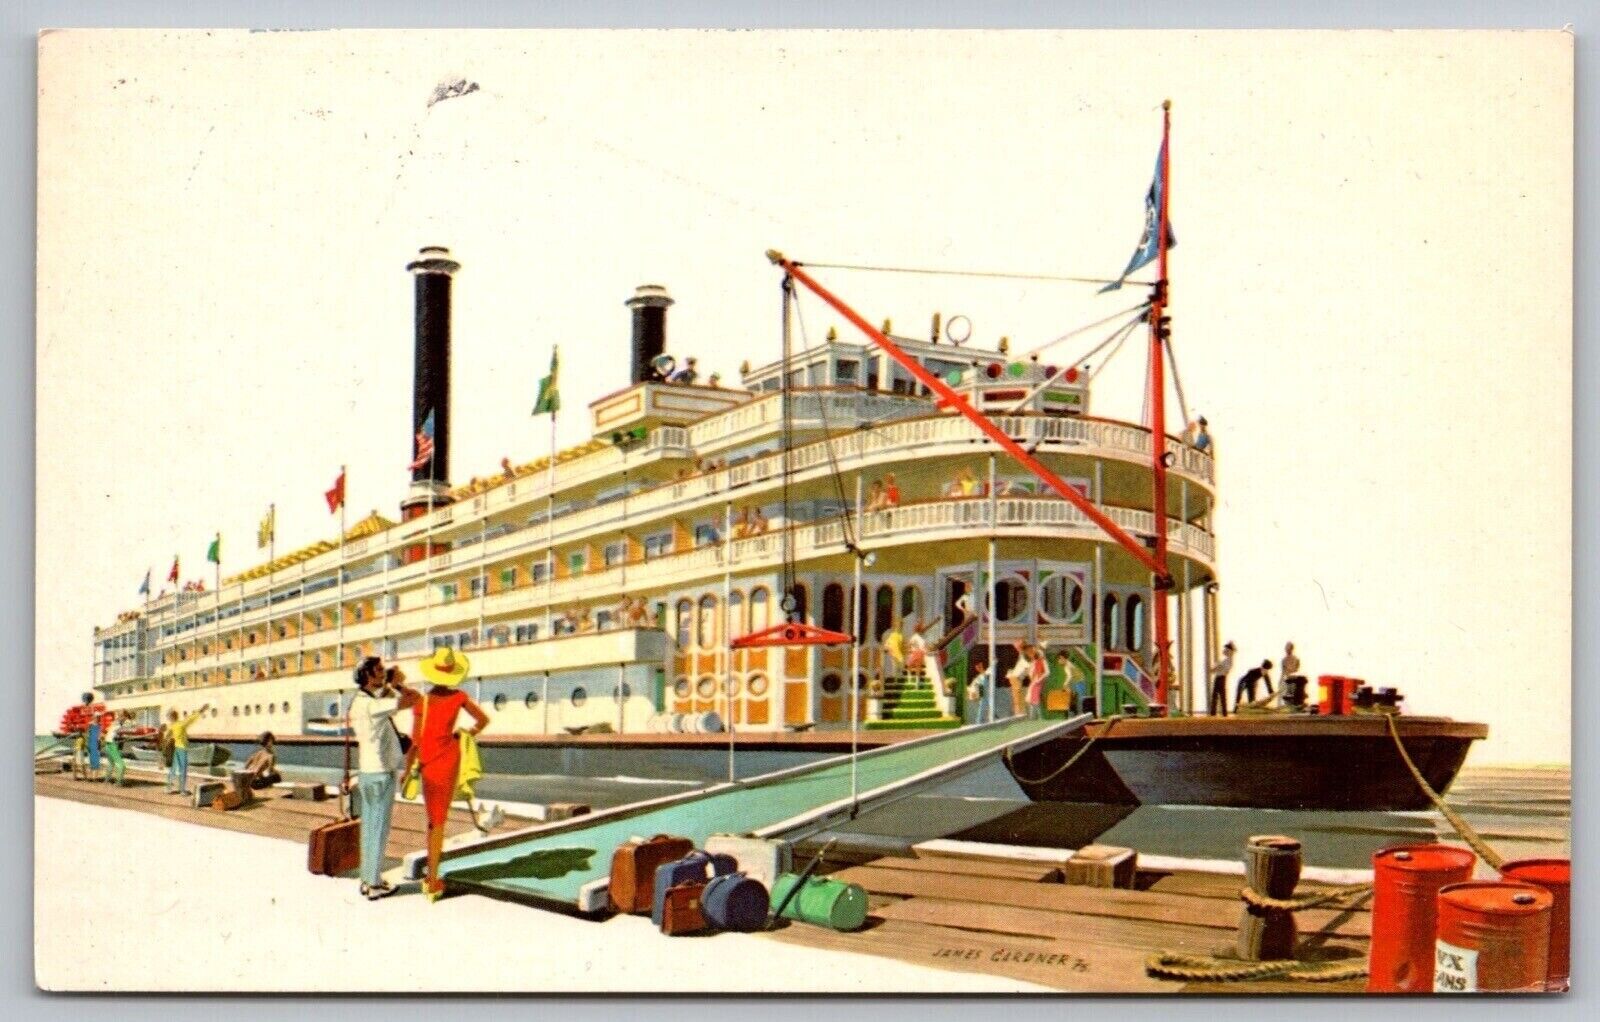 Mississippi Queen Paddlewheel Steamboat Cruise Ship American Flag UNP Postcard